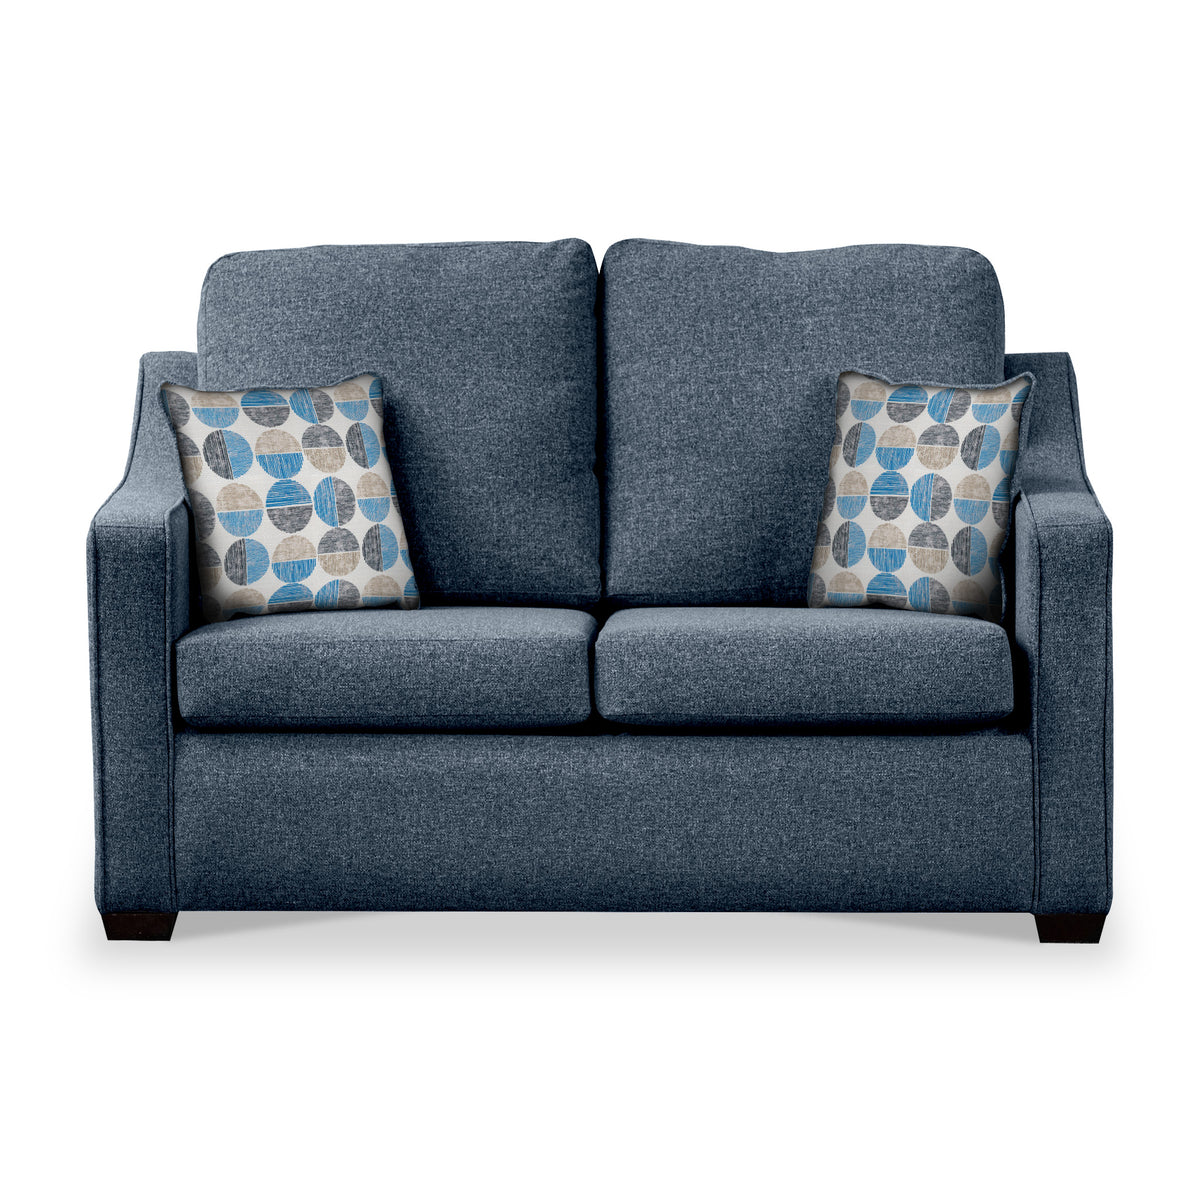 Fenton Midnight Soft Weave 2 Seater Sofabed with Blue Scatter Cushions from Roseland Furniture